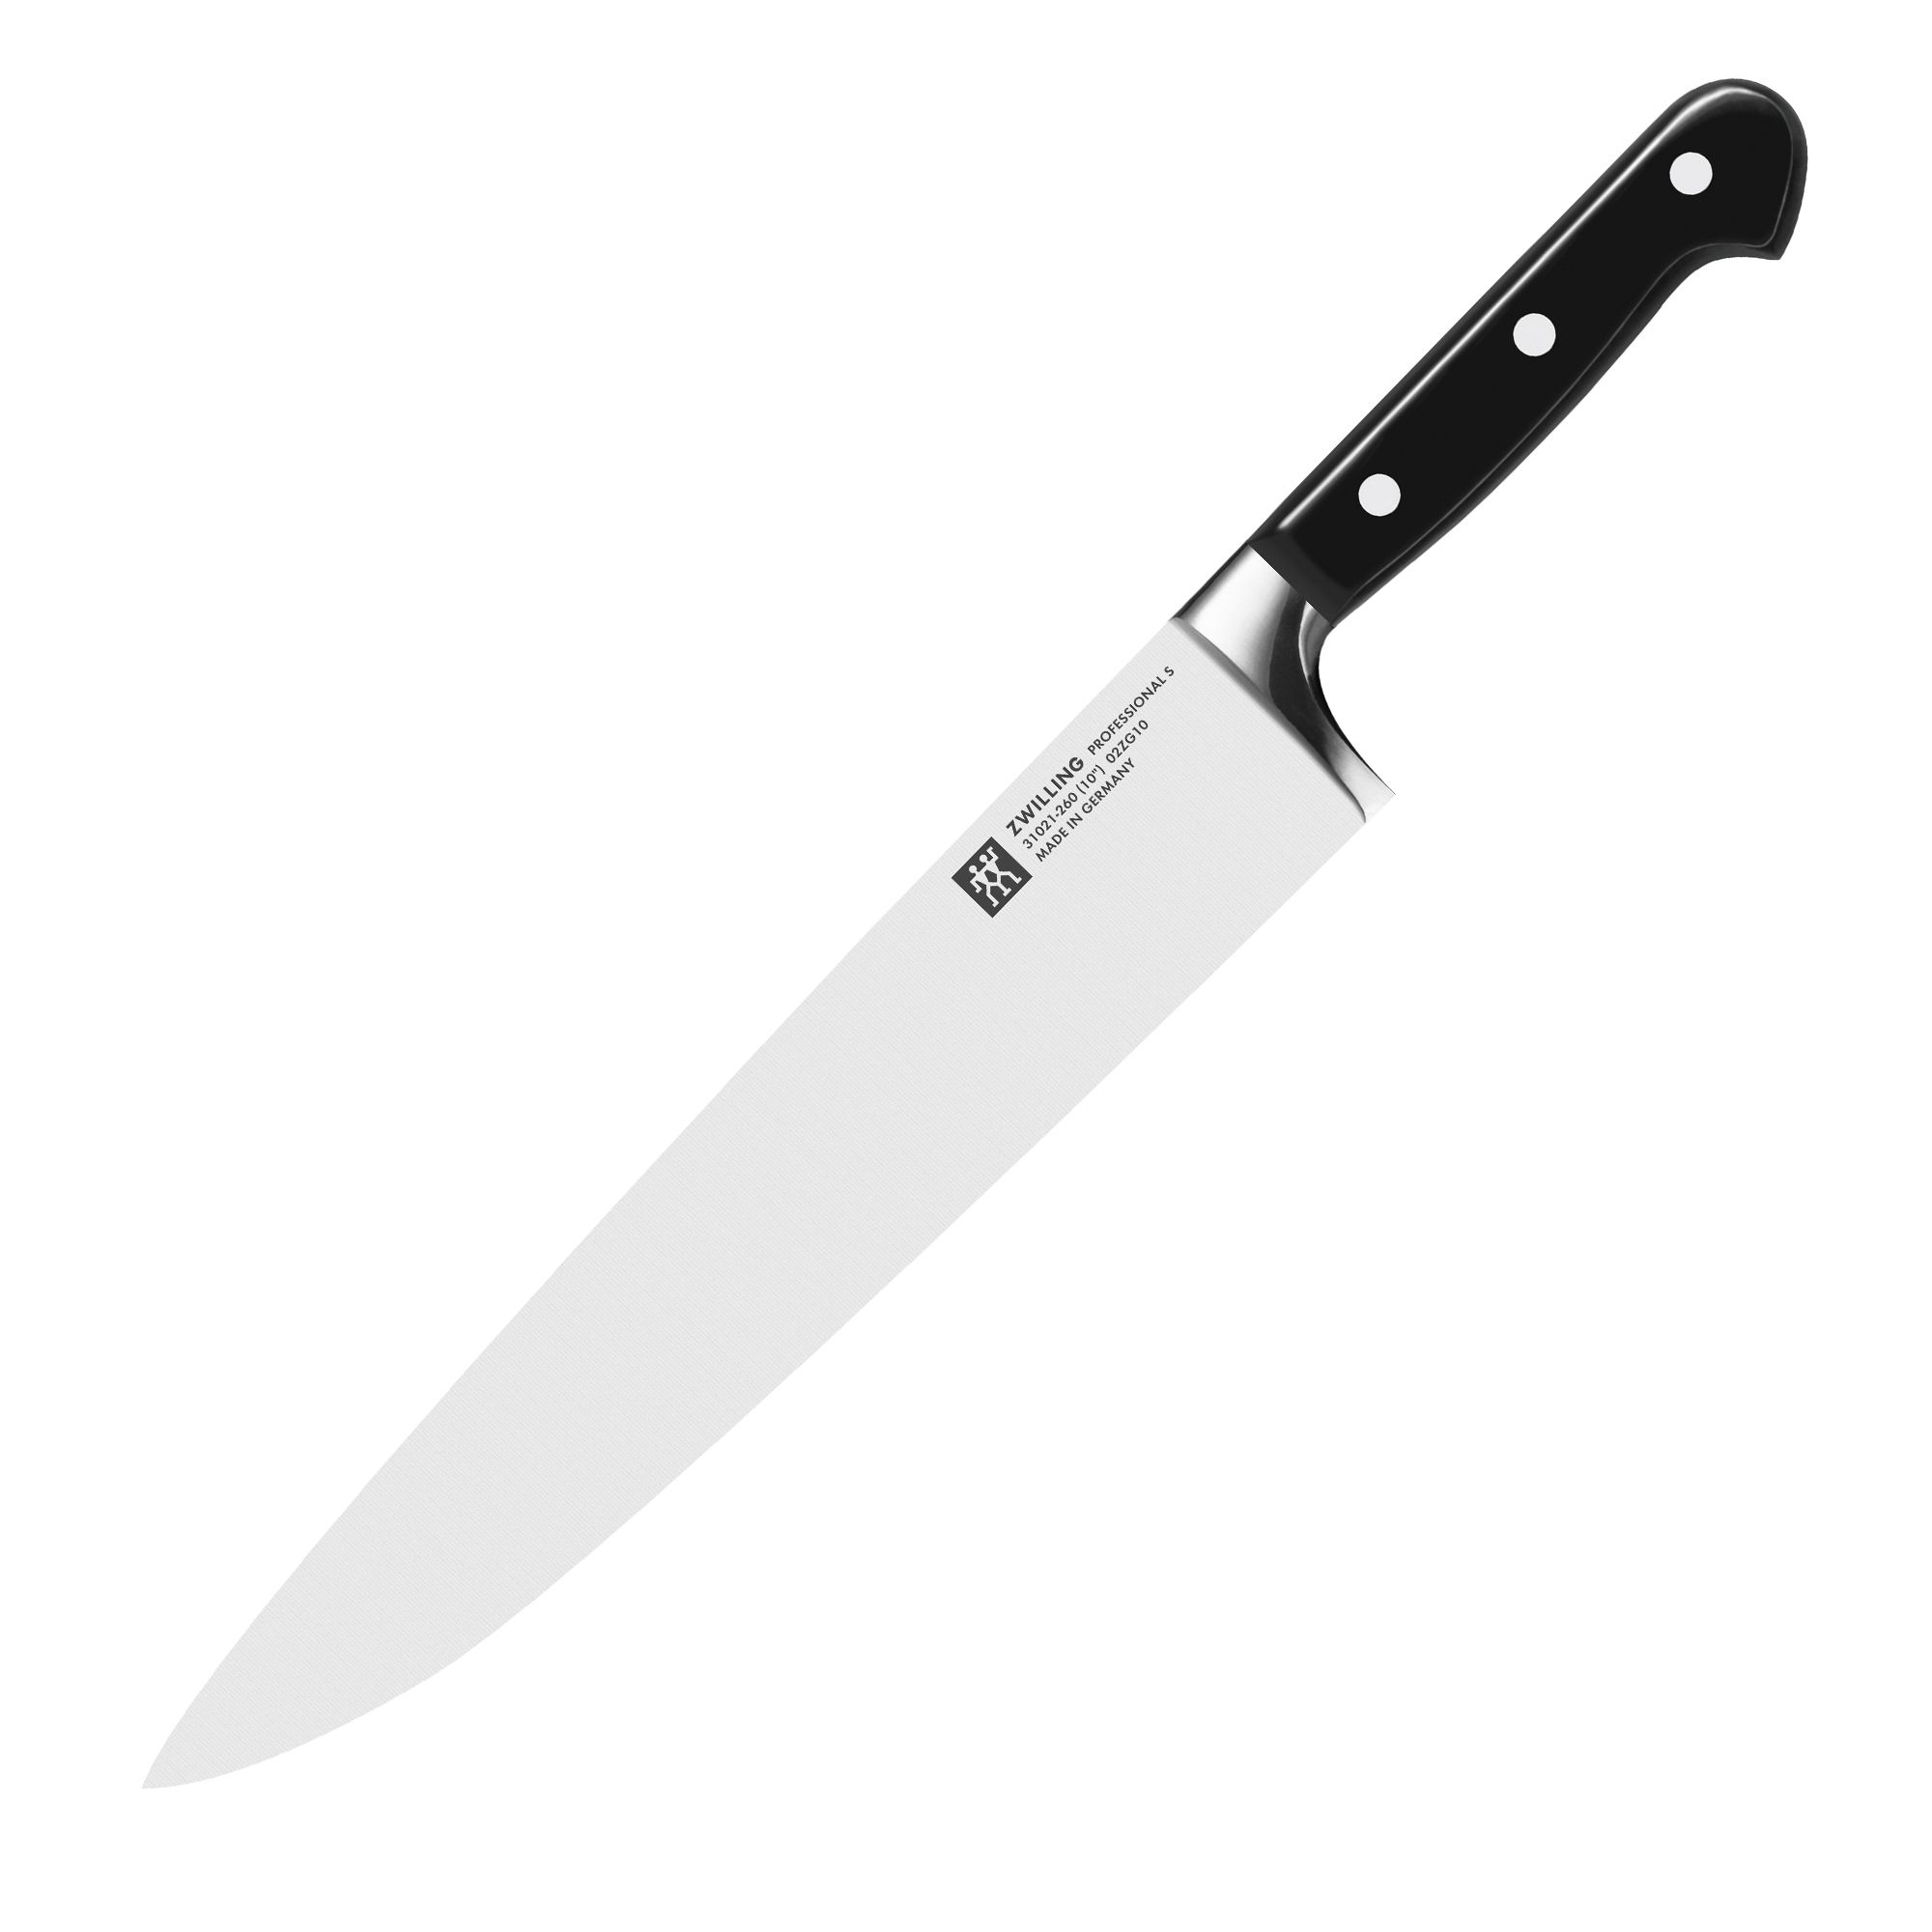 Zwilling - Professional S - Carving knife  - 26 cm